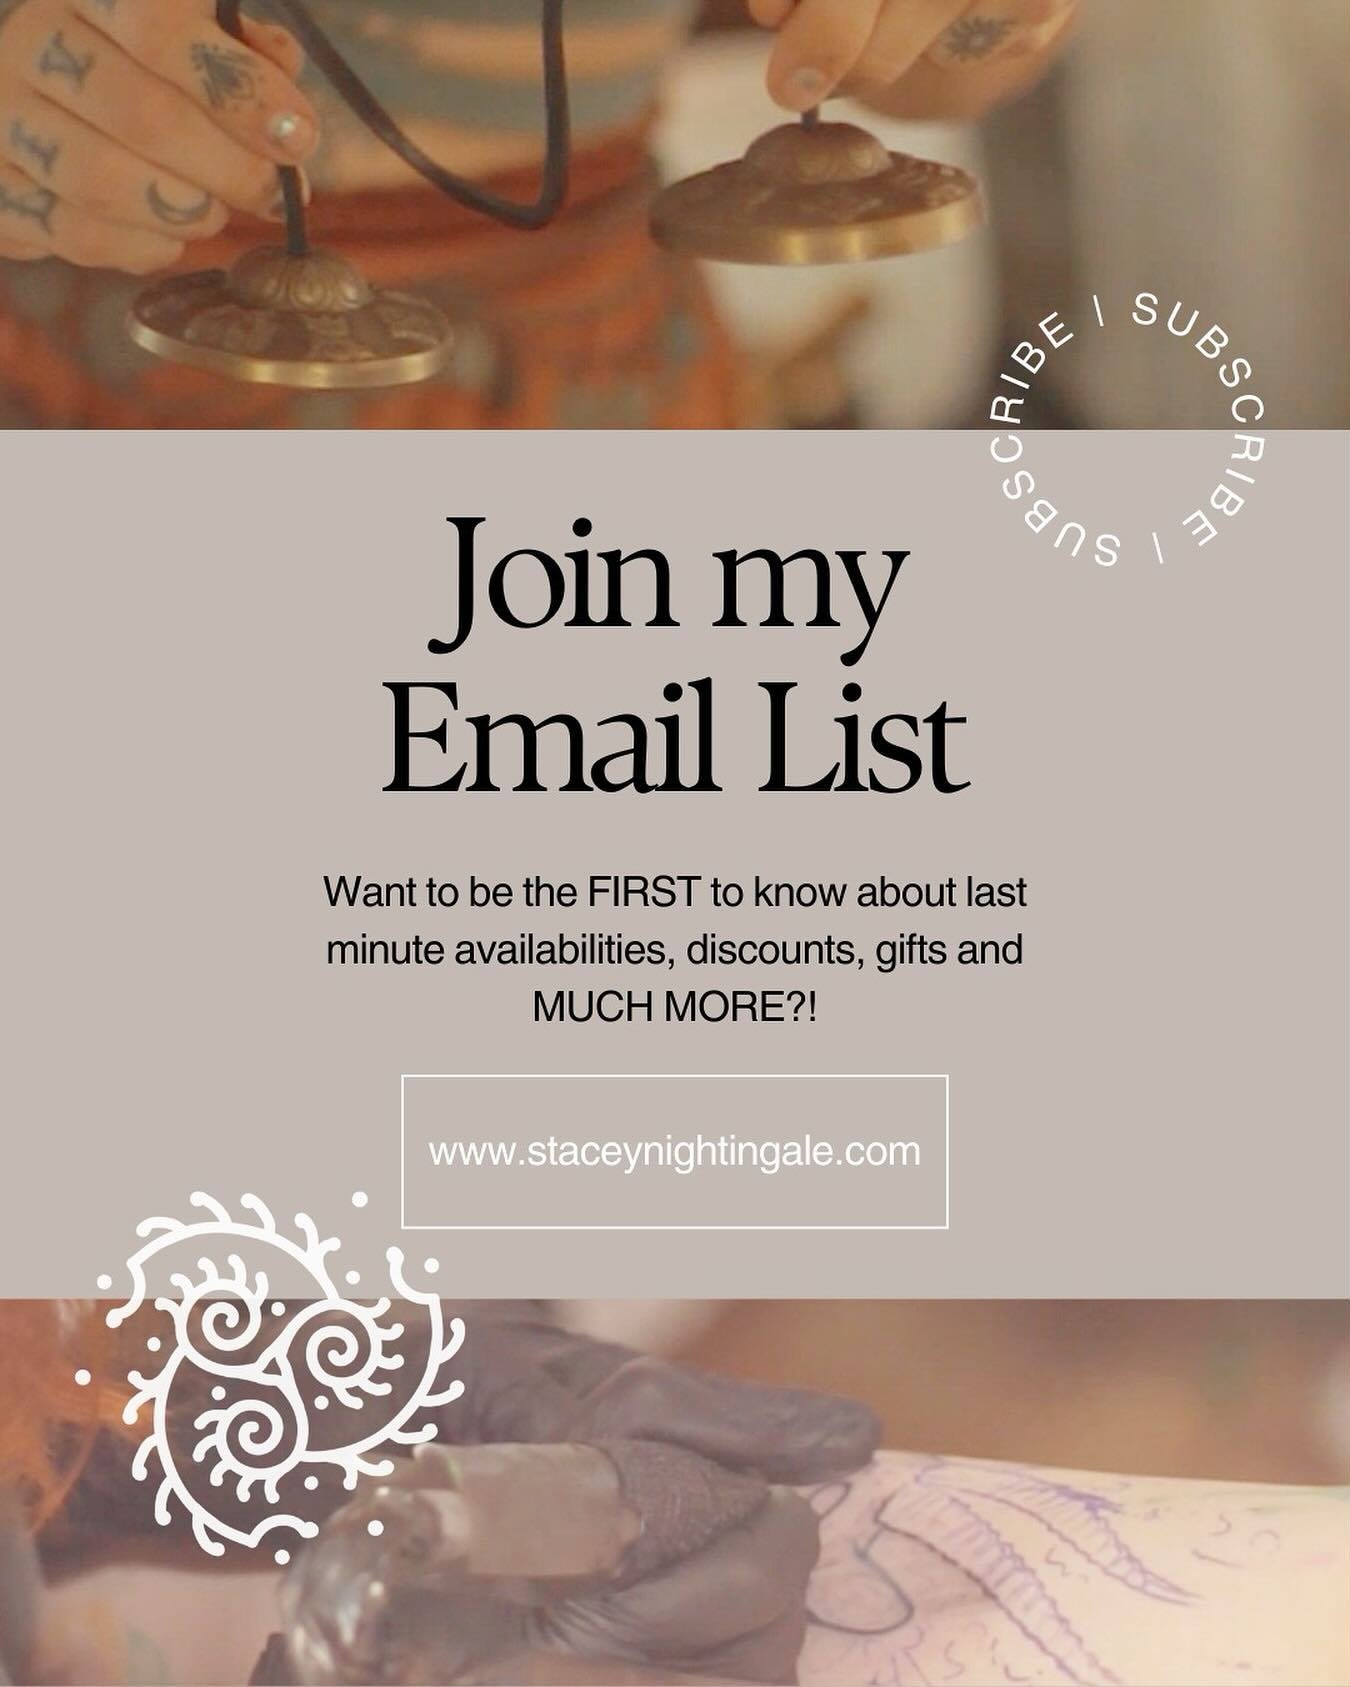 Join my email list!! 😍✨🙌

I PROMISE you won&rsquo;t regret it! 
I&rsquo;ve already been sending our discounts, new offerings, first design previews (that have been snapped up before even getting to Instagram!!), and much more!!! 

Head to my websit